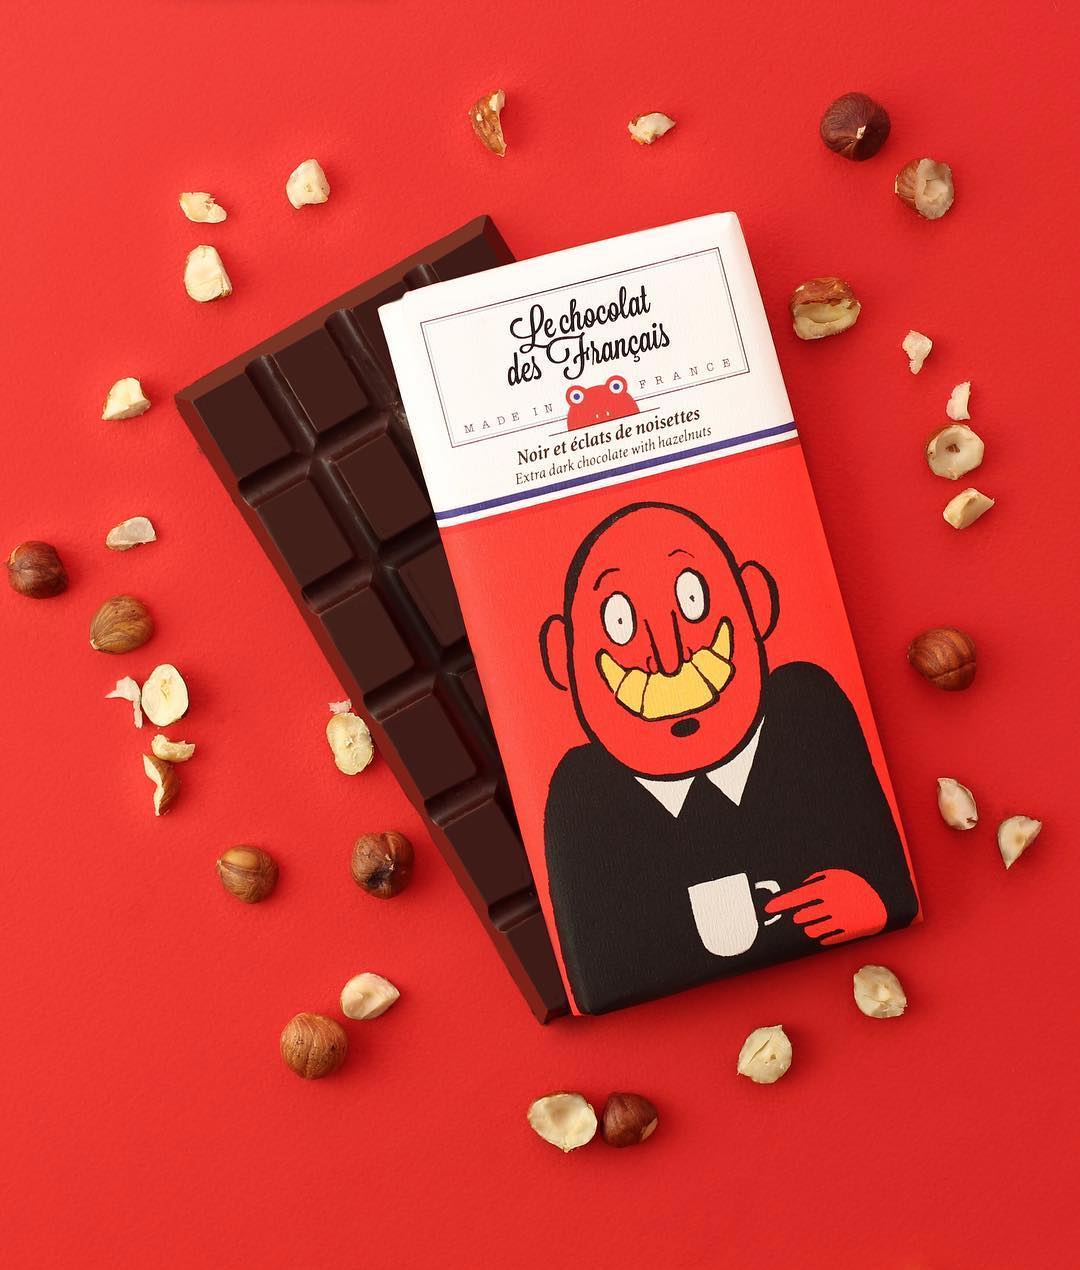 Illustrated packaging for chocolate bars